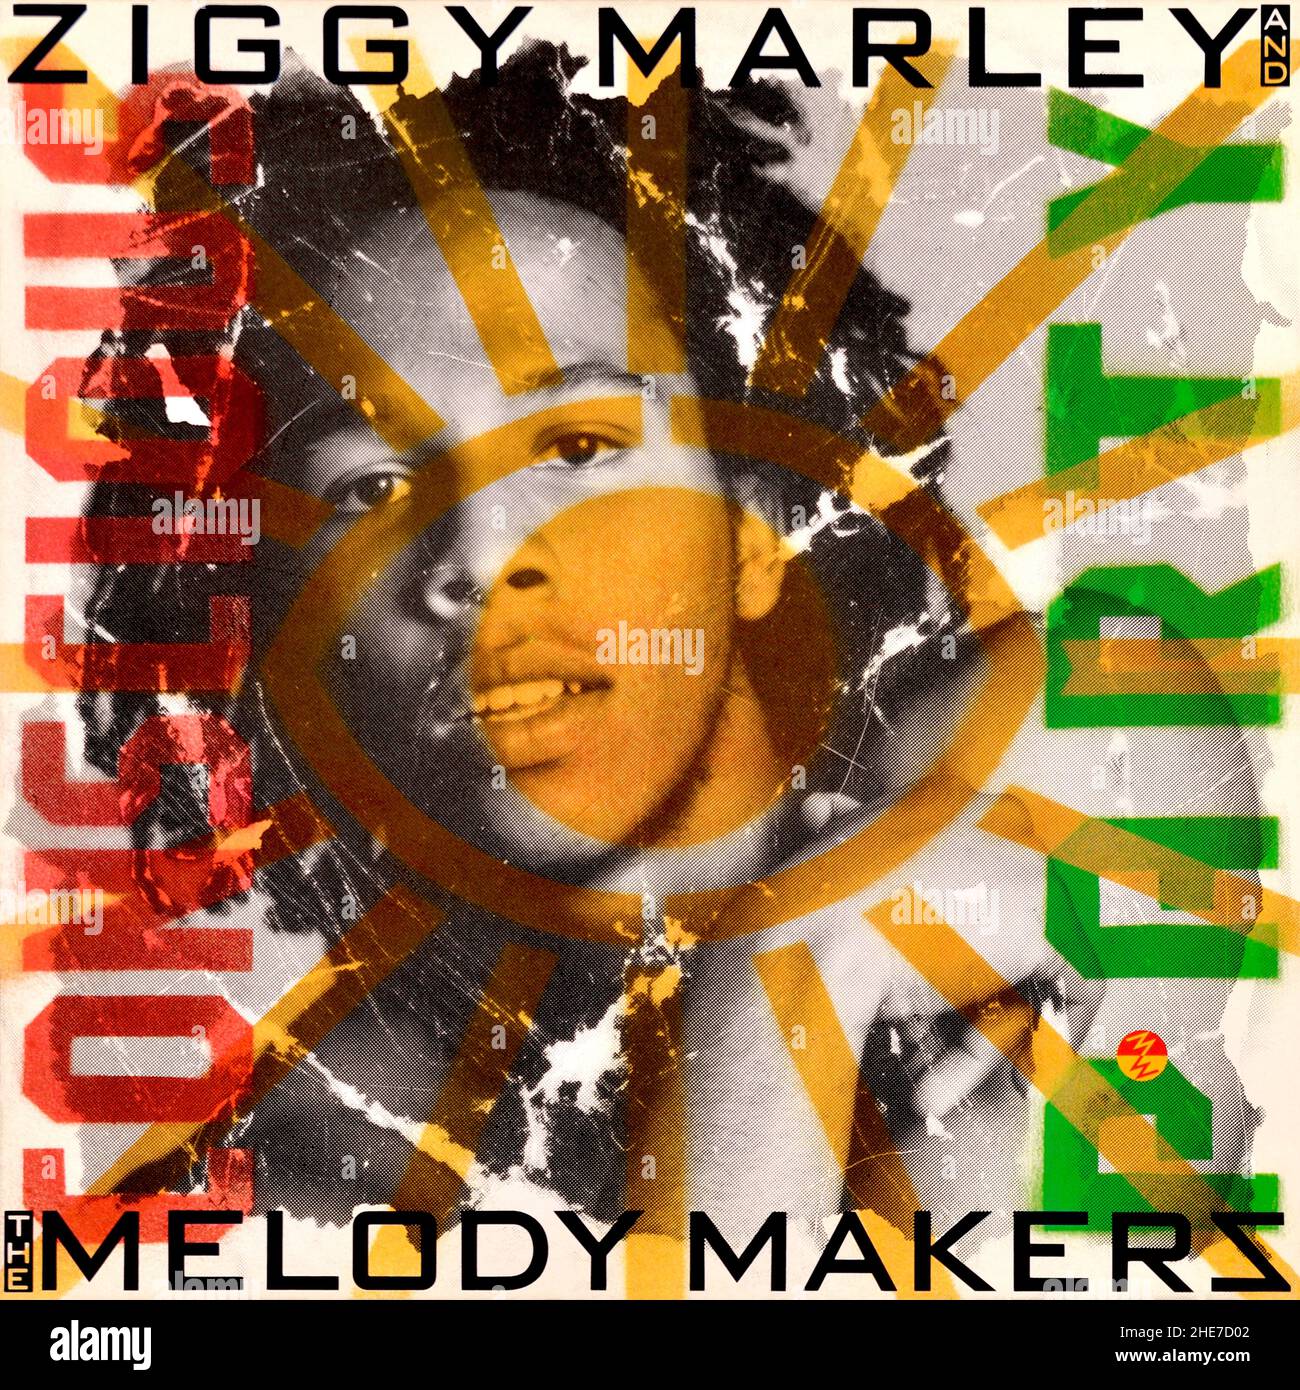 Ziggy Marley And The Melody Makers - original vinyl album cover - Conscious Party - 1988 Stock Photo